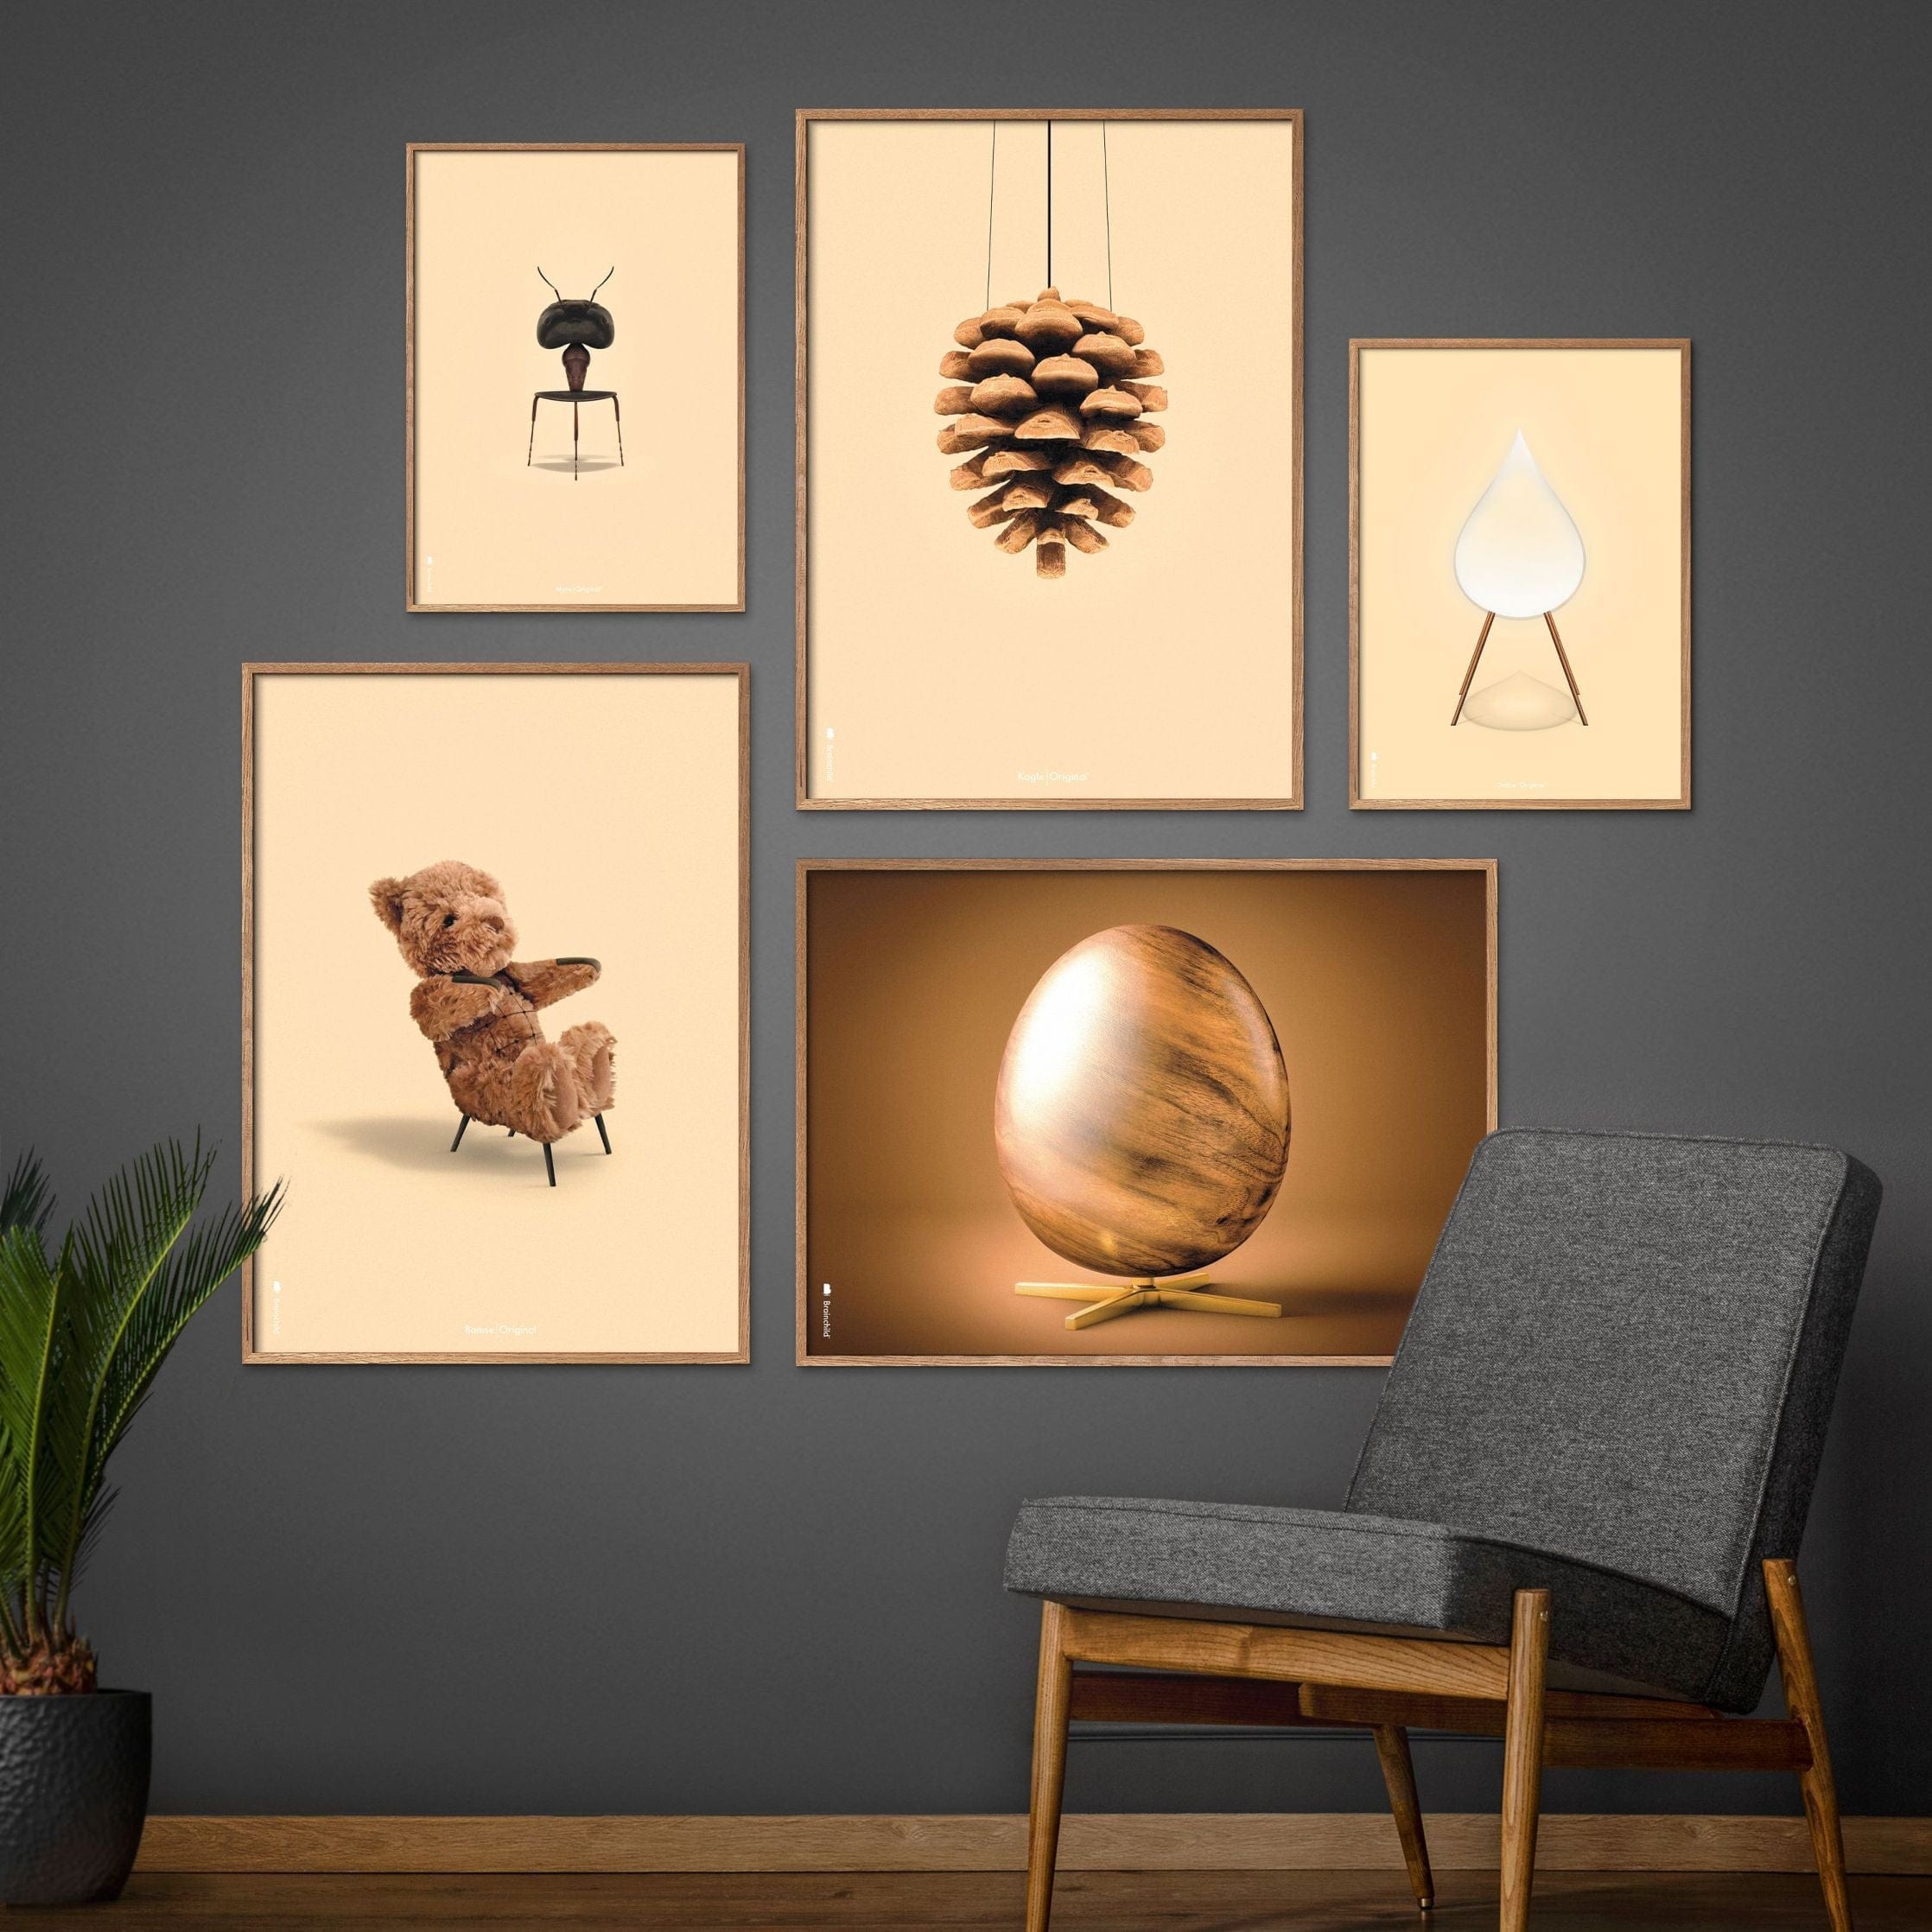 Brainchild Pine Cone Classic Poster, Frame Made Of Light Wood 70x100 Cm, Sand Colored Background